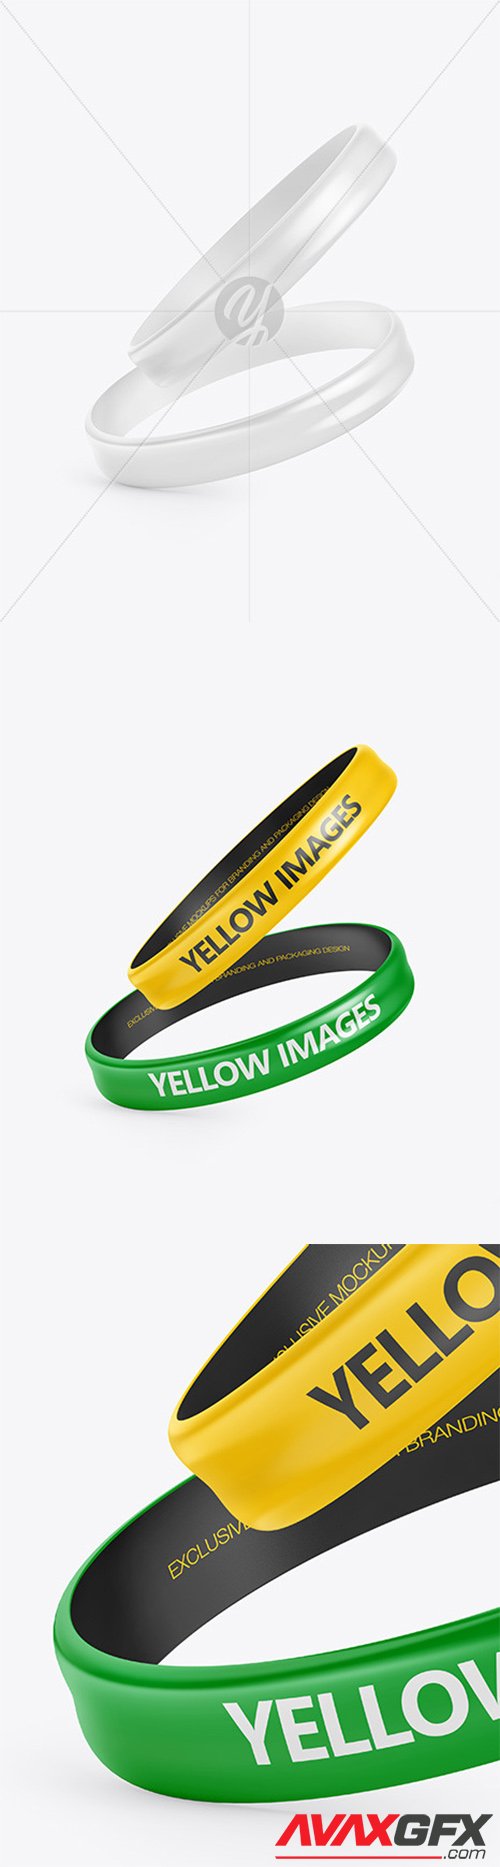 Two Glossy Silicone Wristbands Mockup 66605